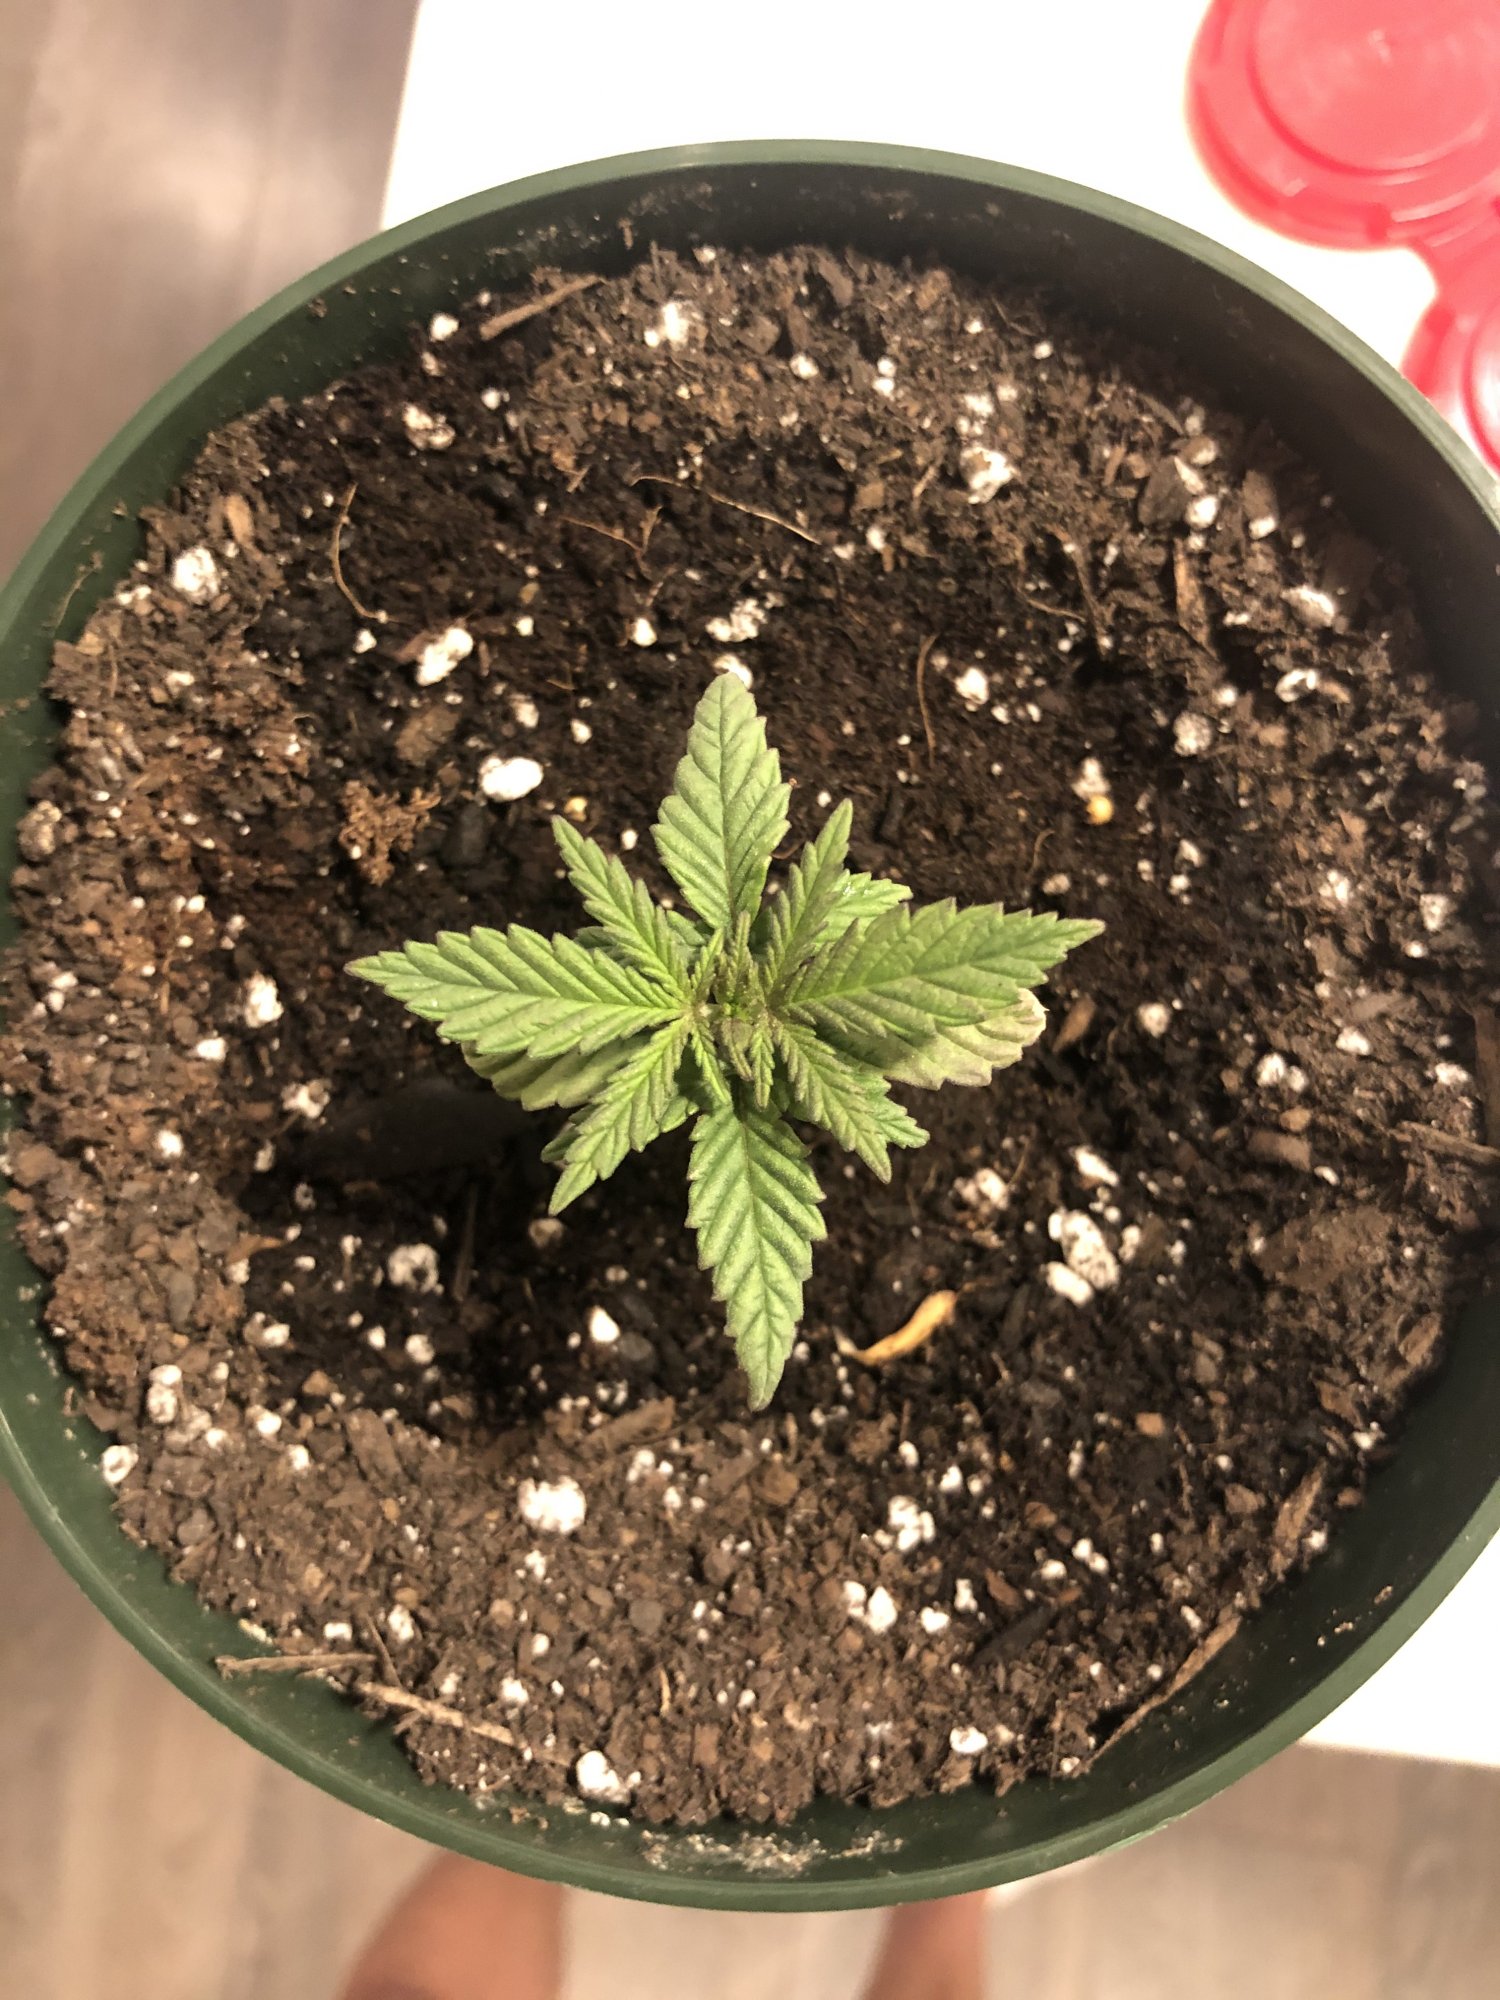 Is this normal for a seedling 3 weeks old